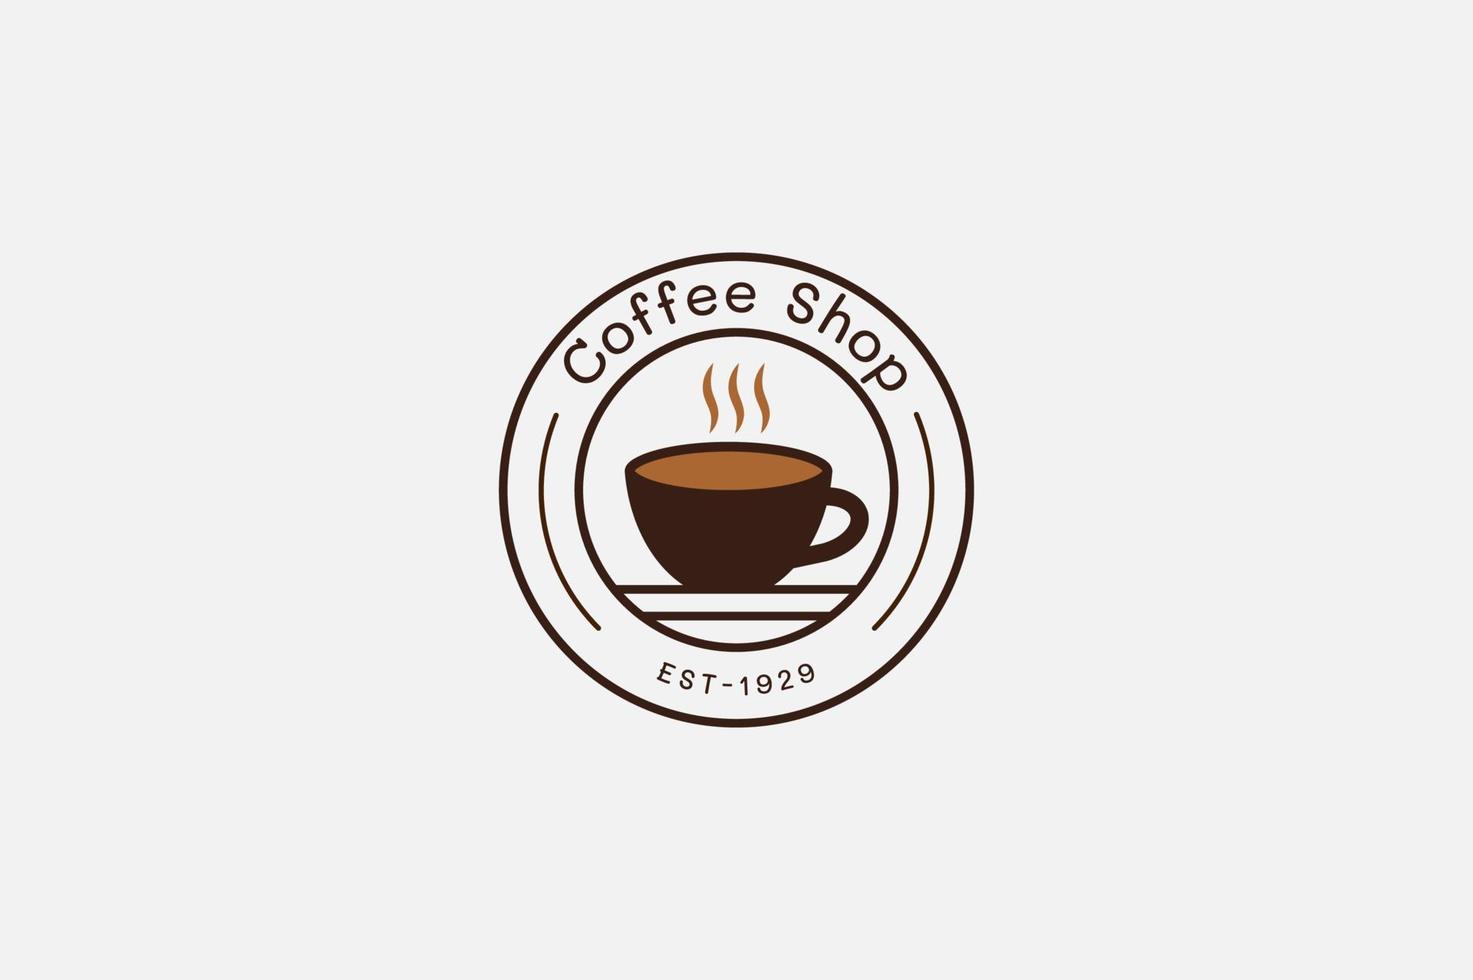 Hot Coffee Vintage Logo Template. Best Coffee Shop Logo Design Template Vector Abstract Coffee Logo For Branding A Coffee Shop